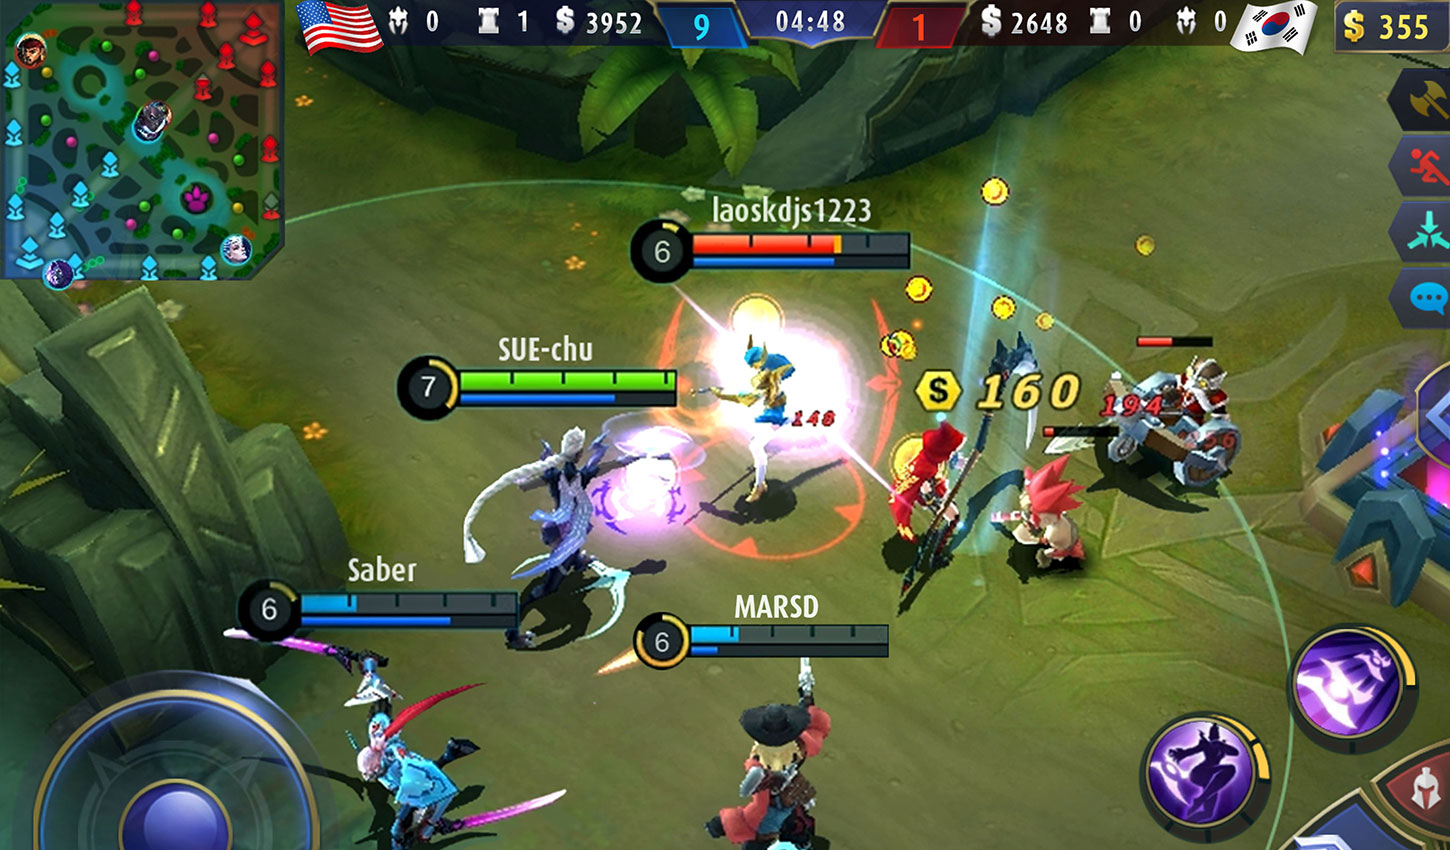 Mobile Legends U.S. Revenue Grew 33% in Q1 as Arena of Valor and Other  MOBAs Struggled